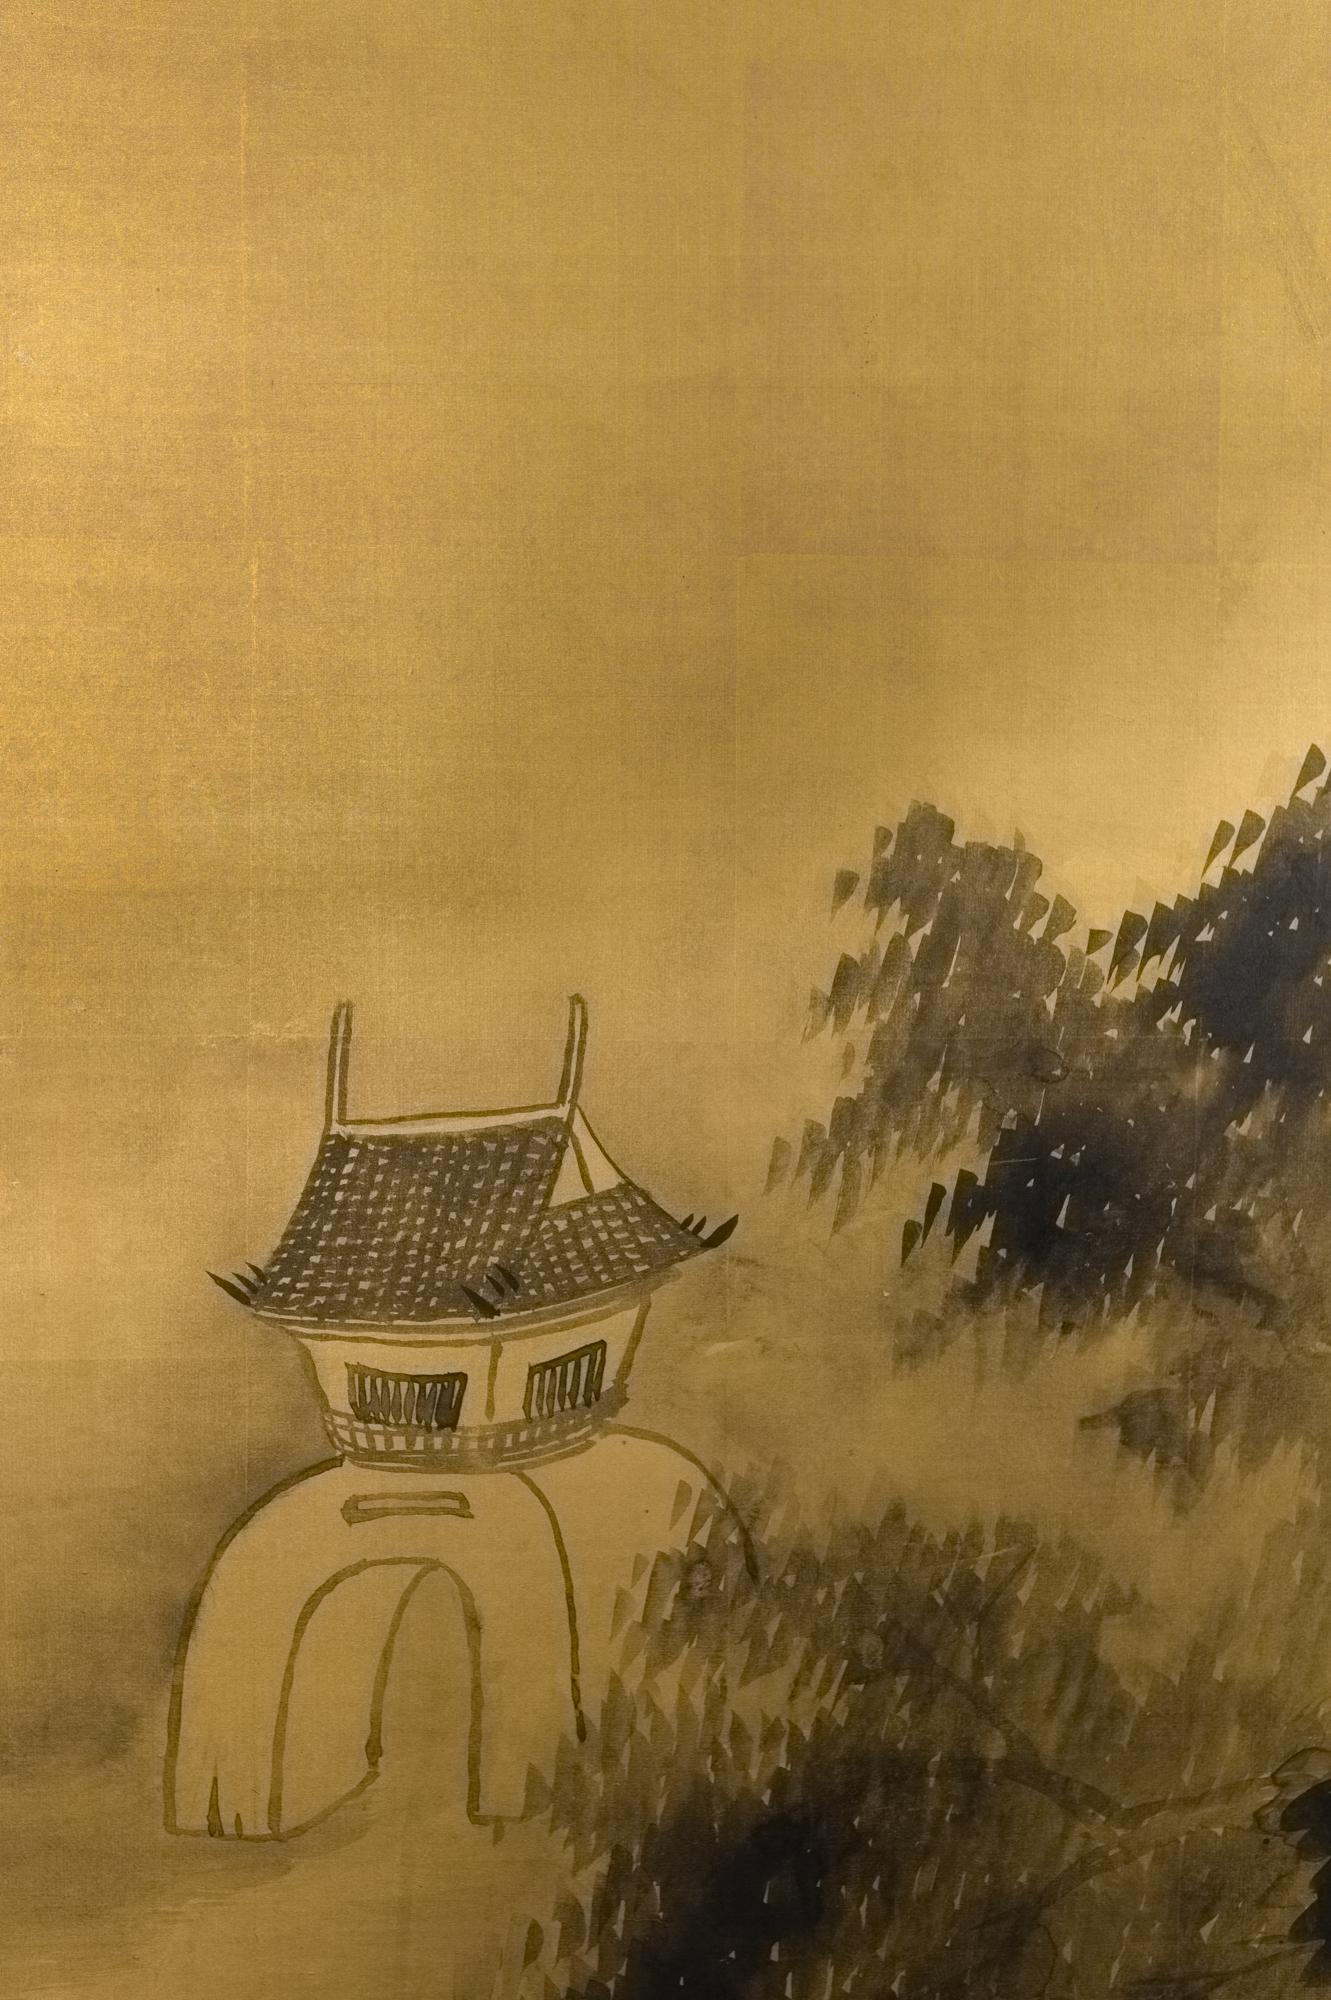 Japanese two-panel screen: Temples Through Misty Forest. Chinese School landscape ink painting on gilded silk by Yukimatsu Shunpo, signed and dated 1924. Yukimatsu Shunpo was born in Oita in 1897 and studied under Himejima Chikugai in Osaka. He